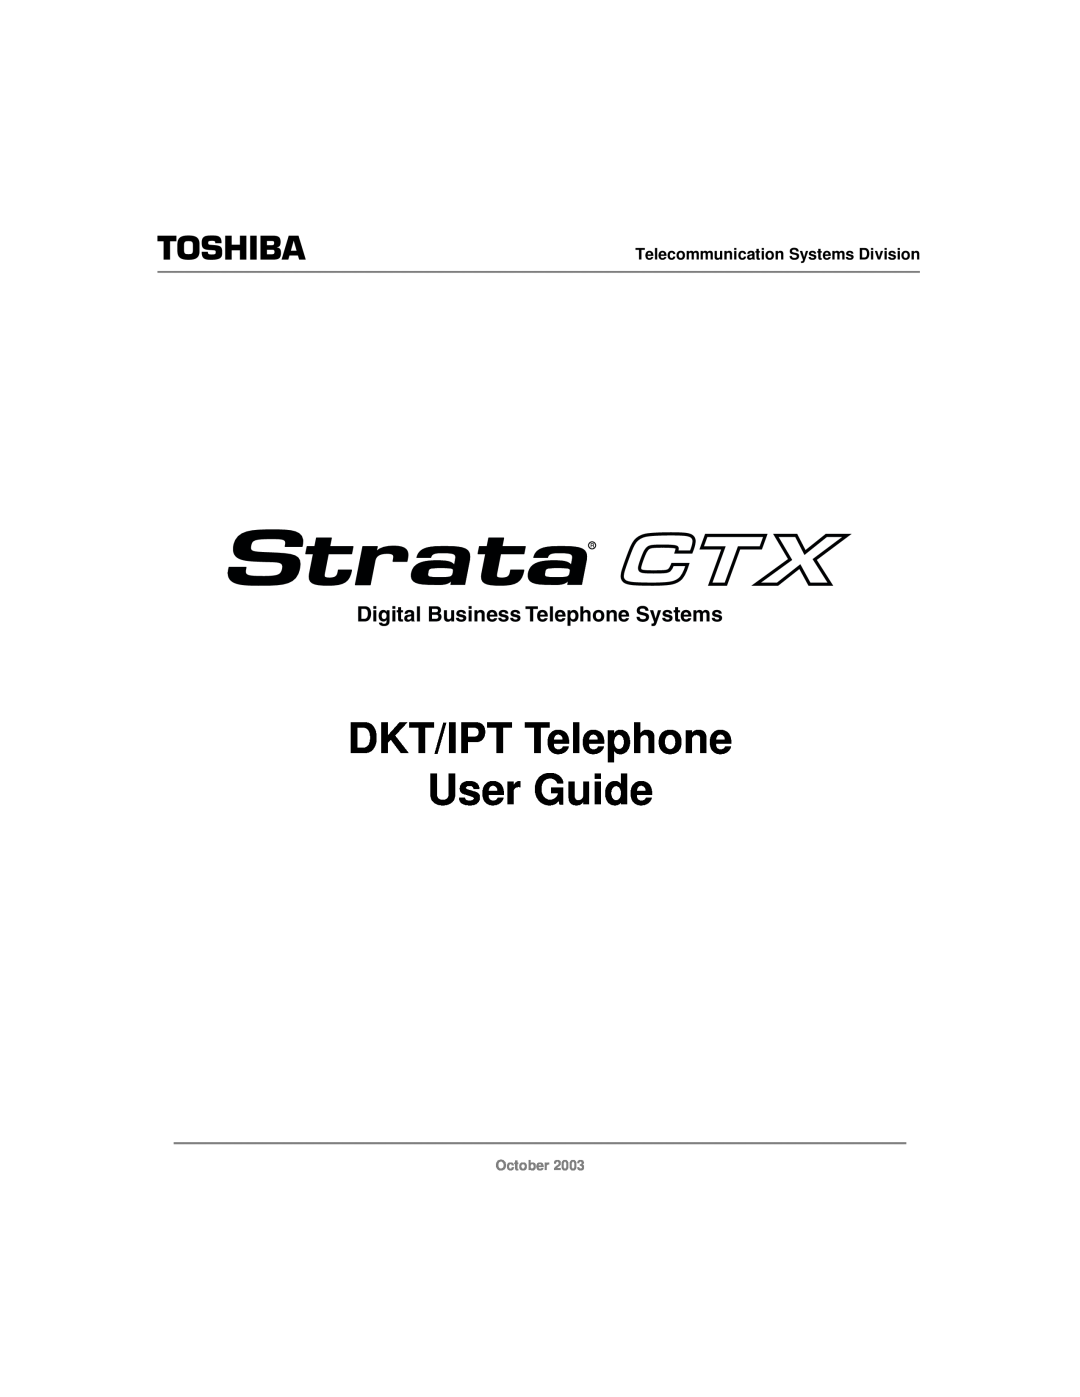 Toshiba manual DKT/IPT Telephone User Guide, Digital Business Telephone Systems, Telecommunication Systems Division 